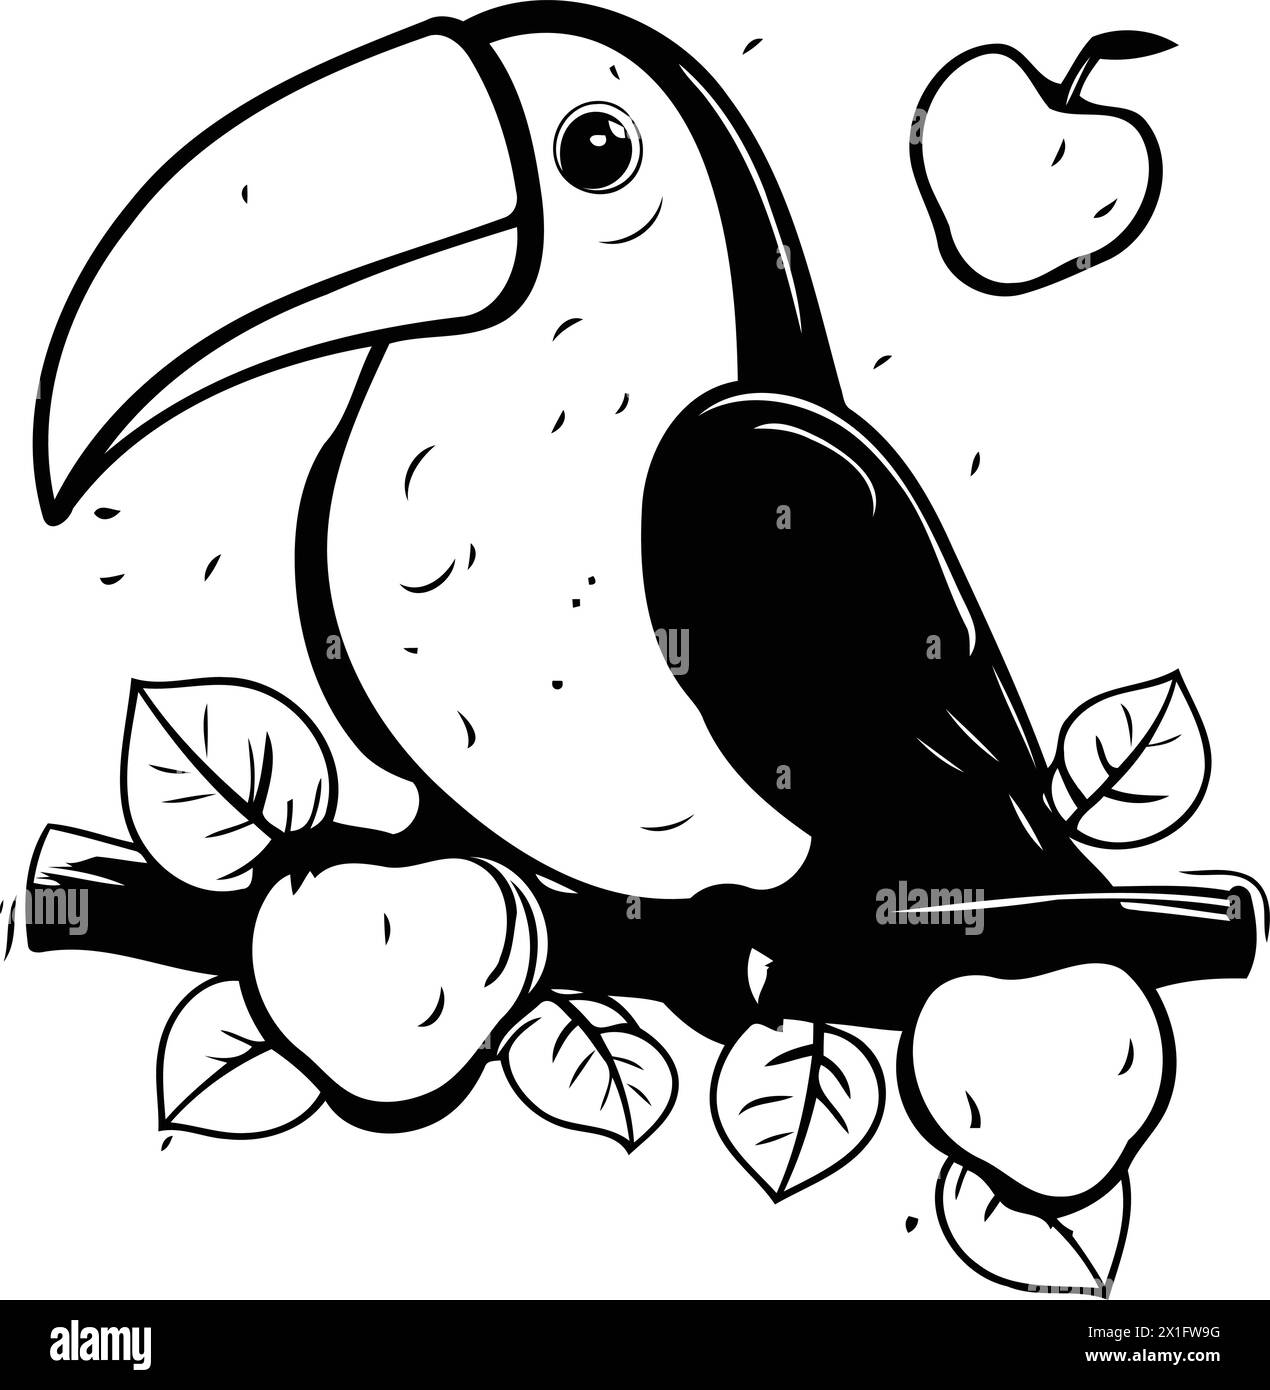 Cute toucan sitting on a branch with apples. Vector illustration. Stock Vector